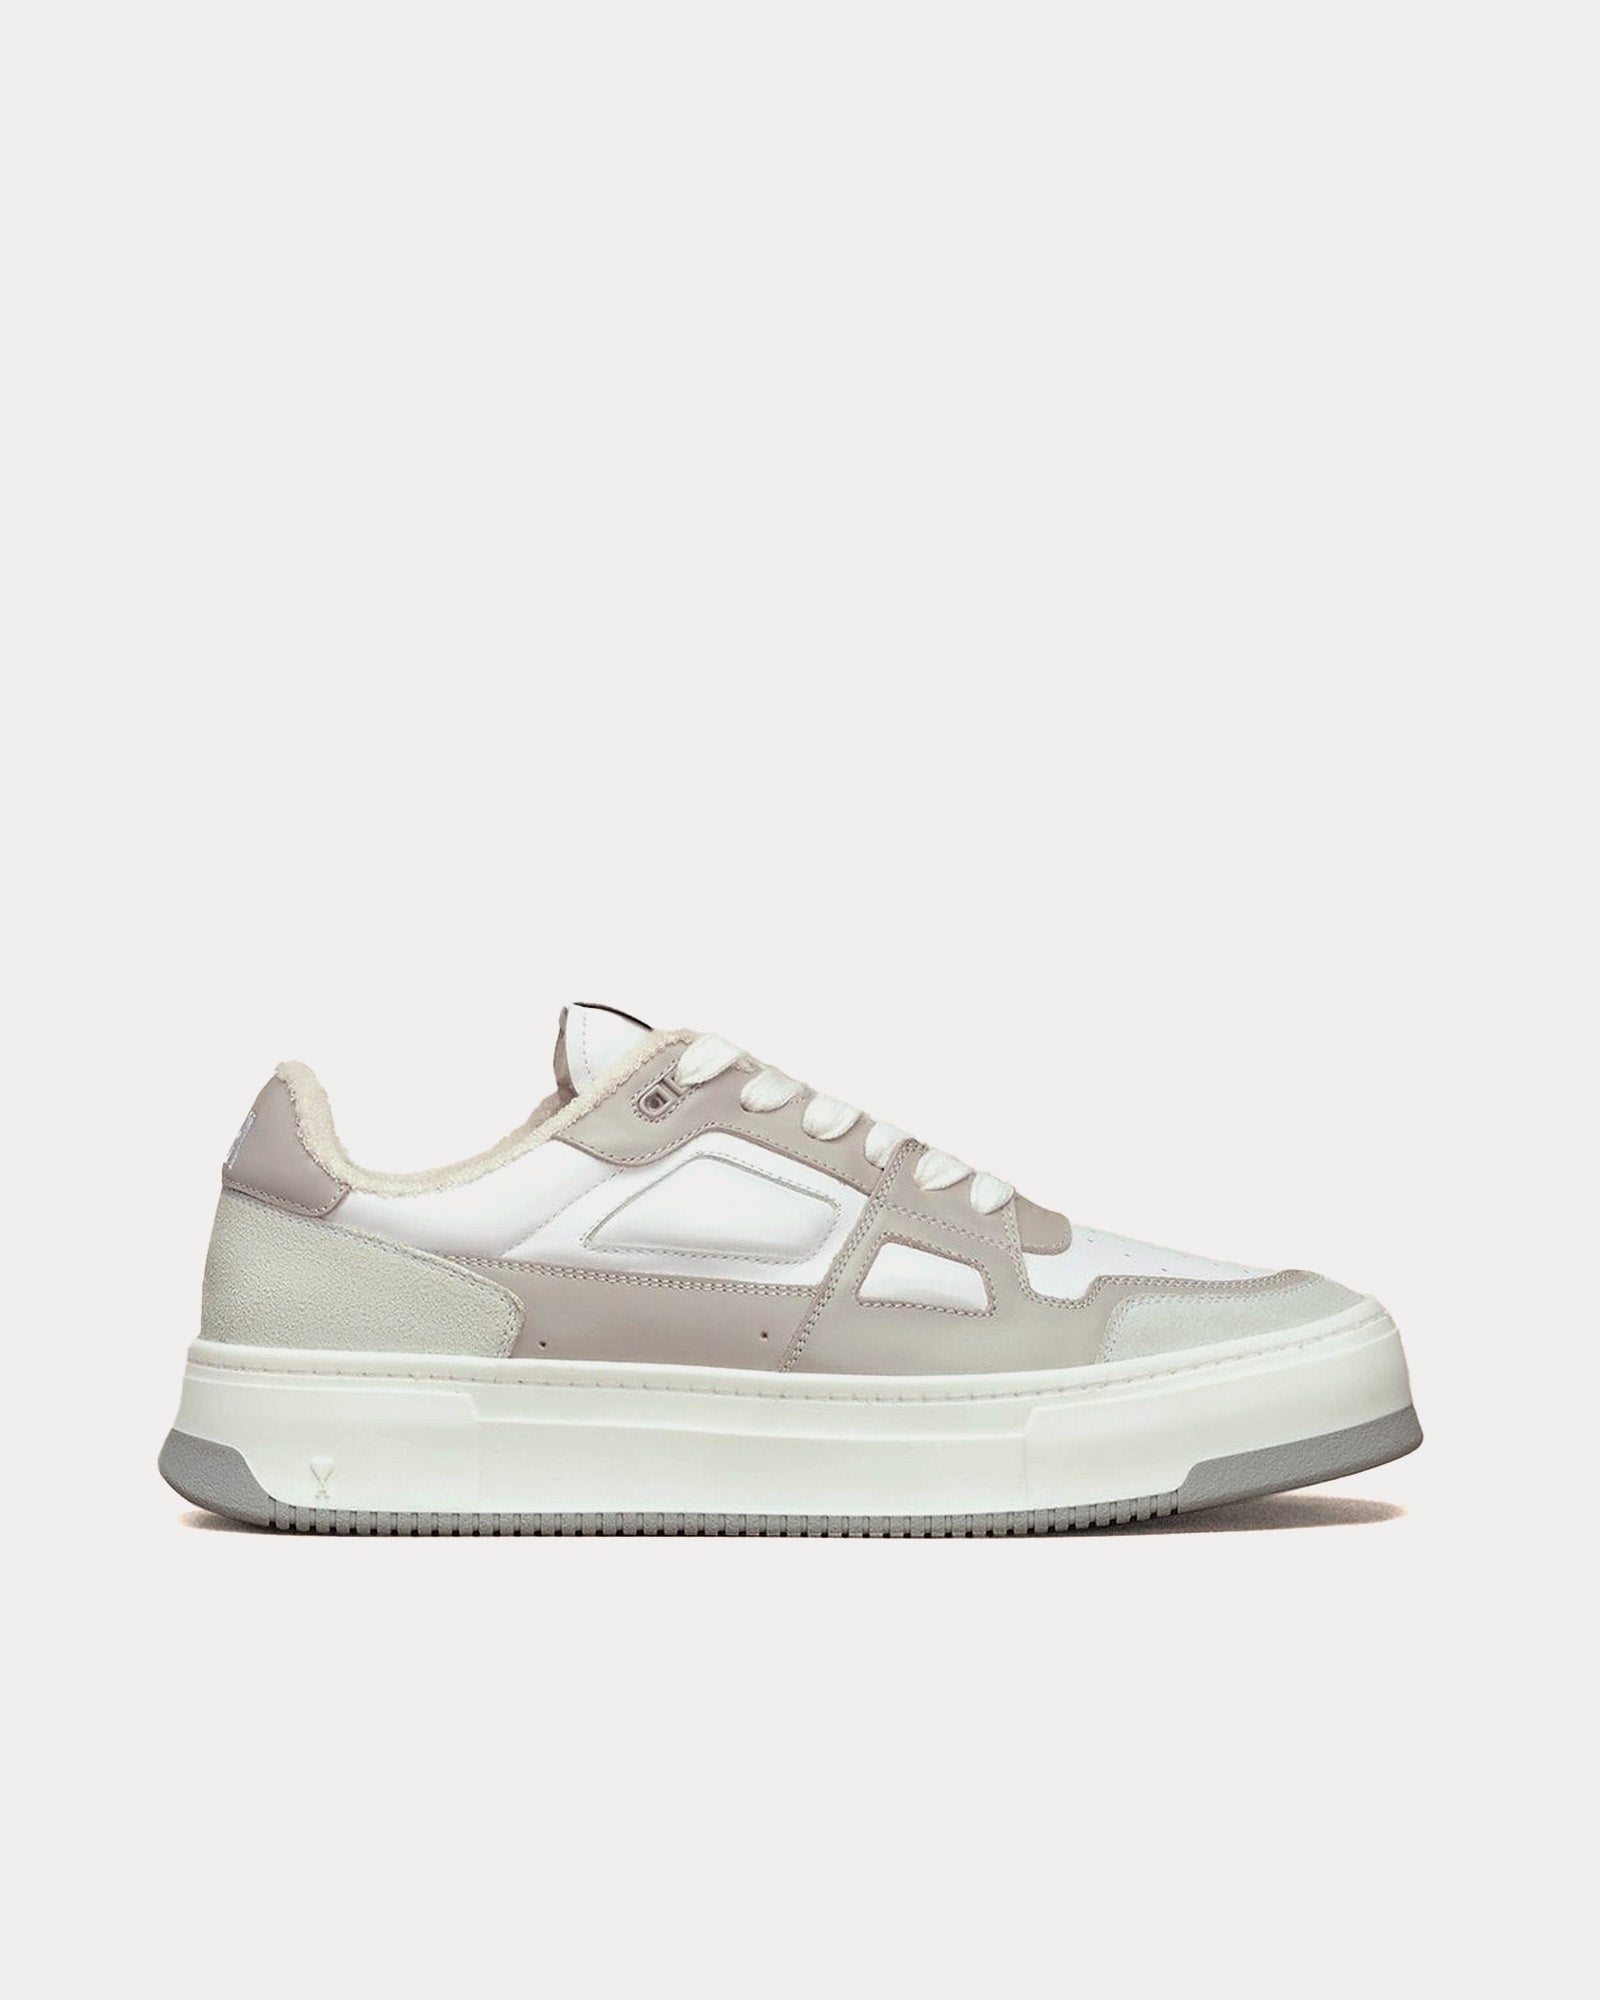 AMI - Arcade Leather White / Ash Grey Low Top Sneakers